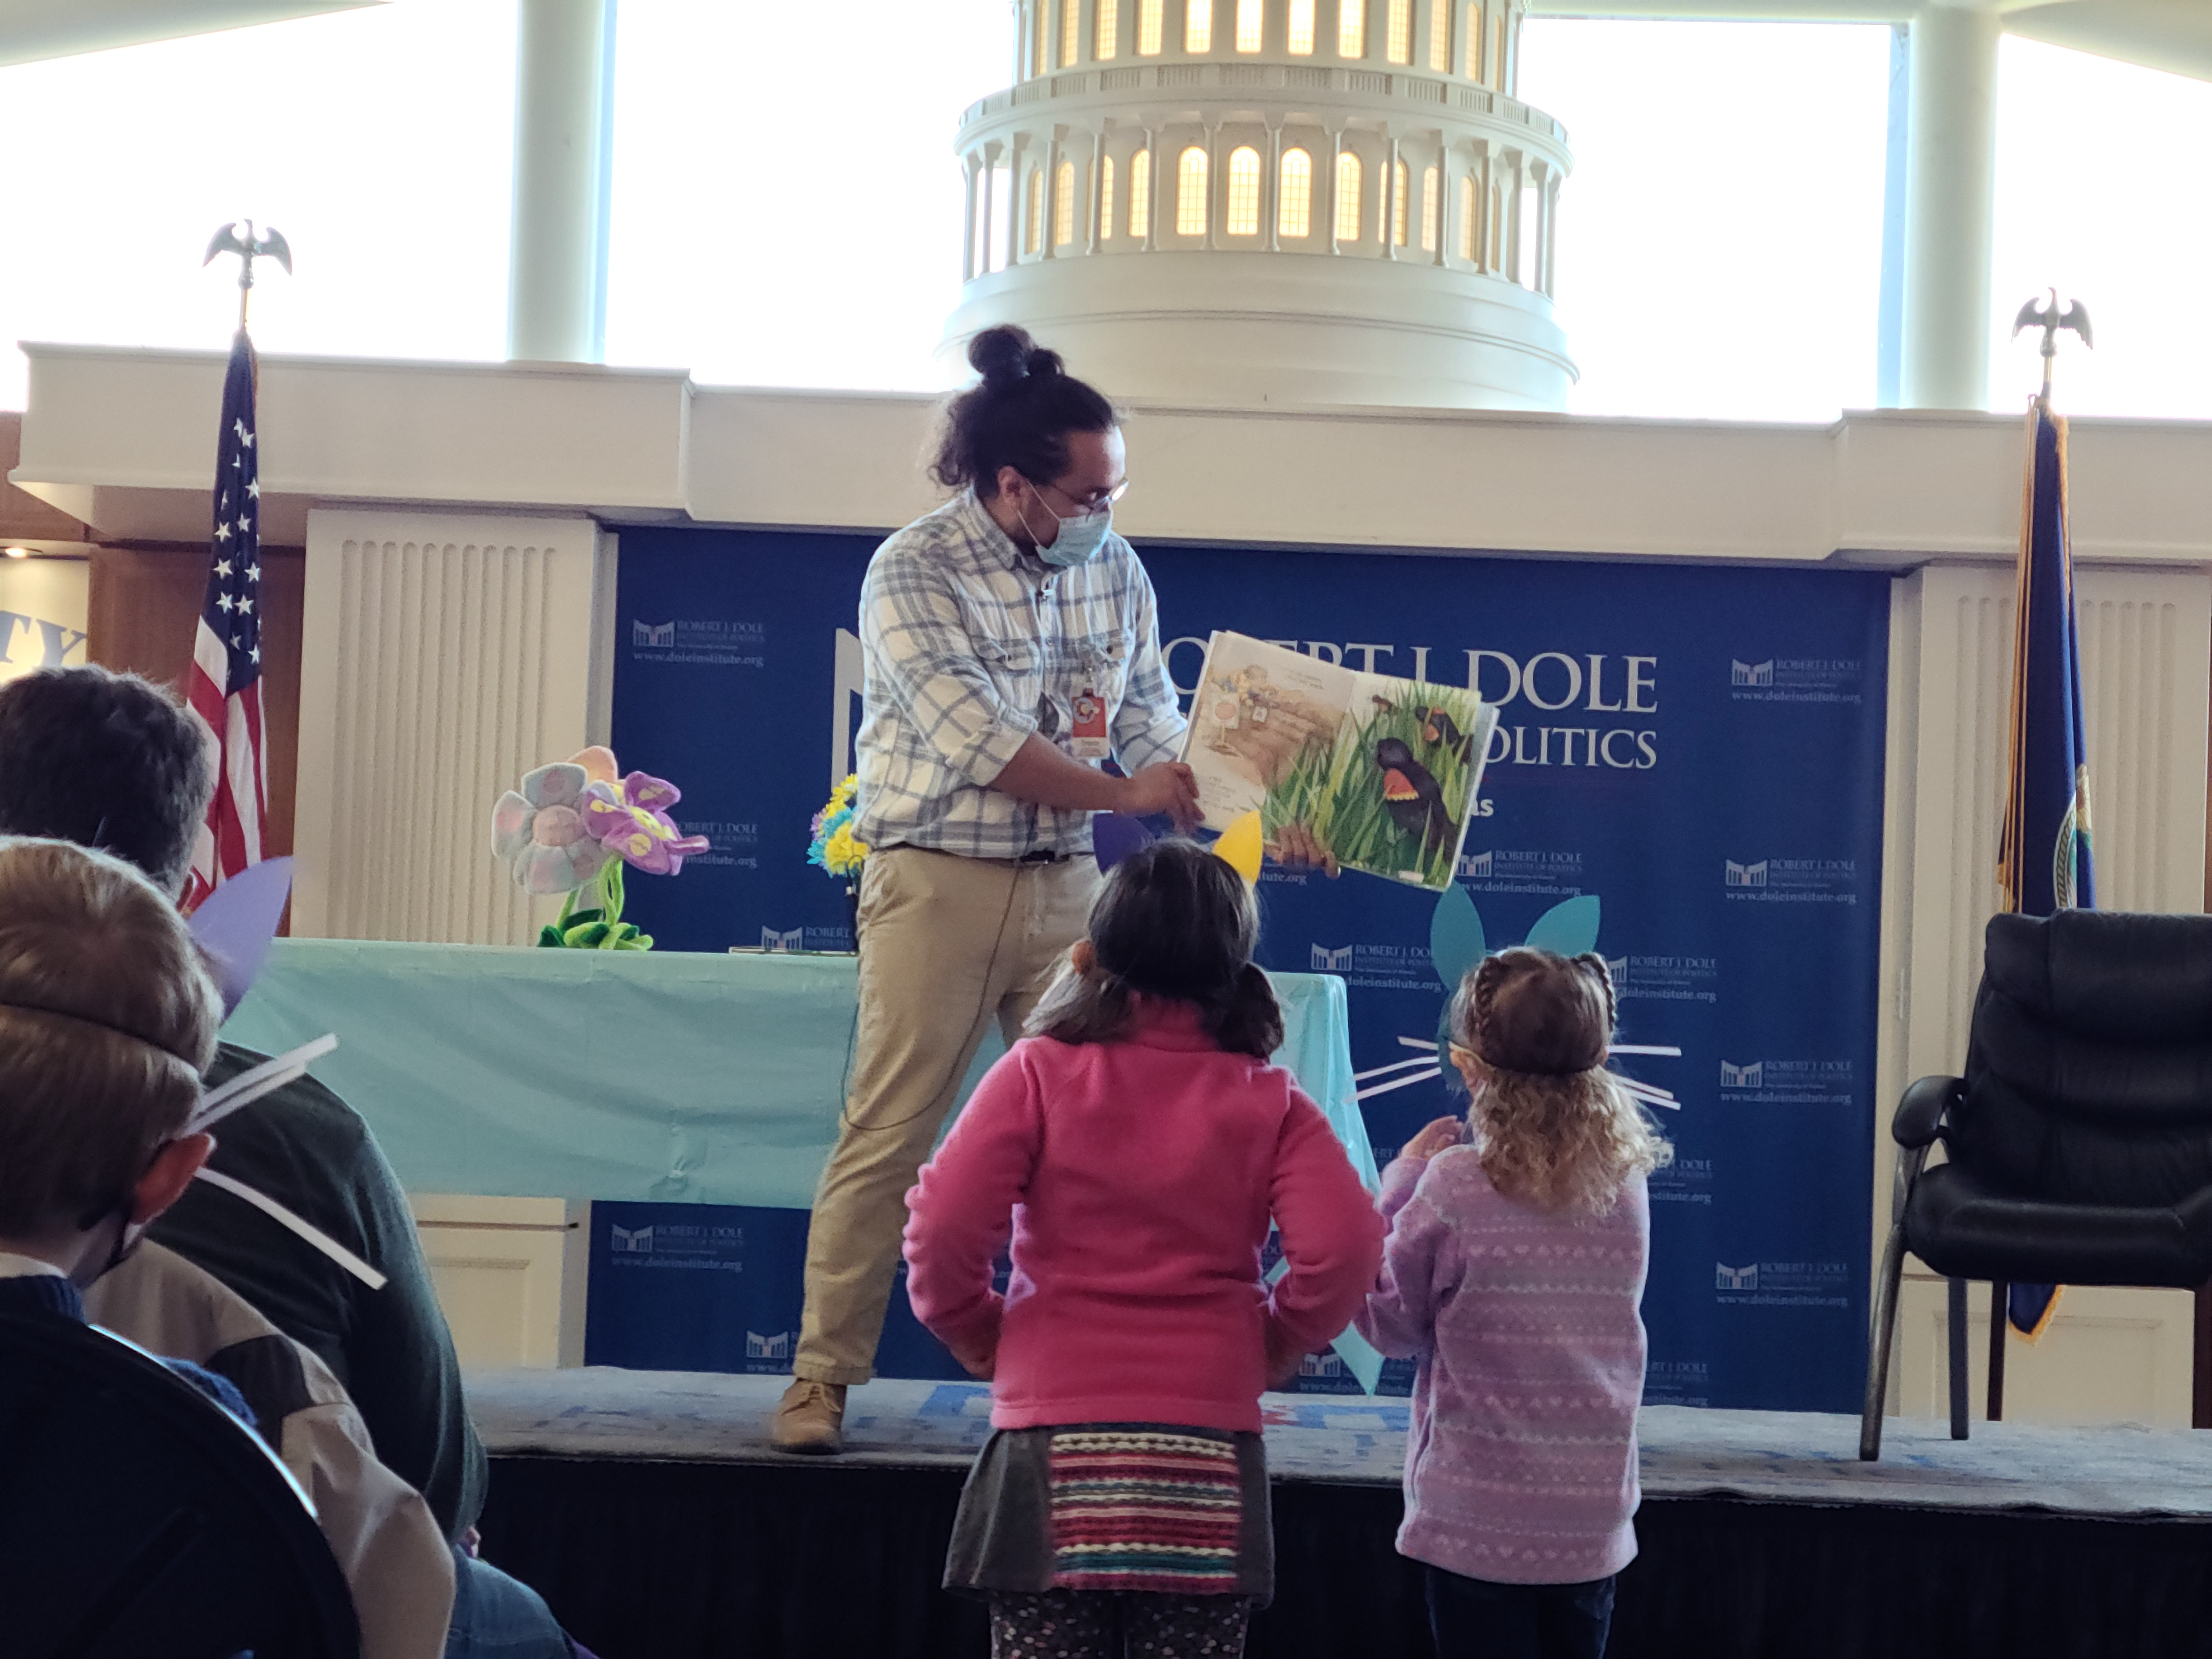 A man on stage in the Dole Institute holds up a story book he is reading as two children look up at the pictures